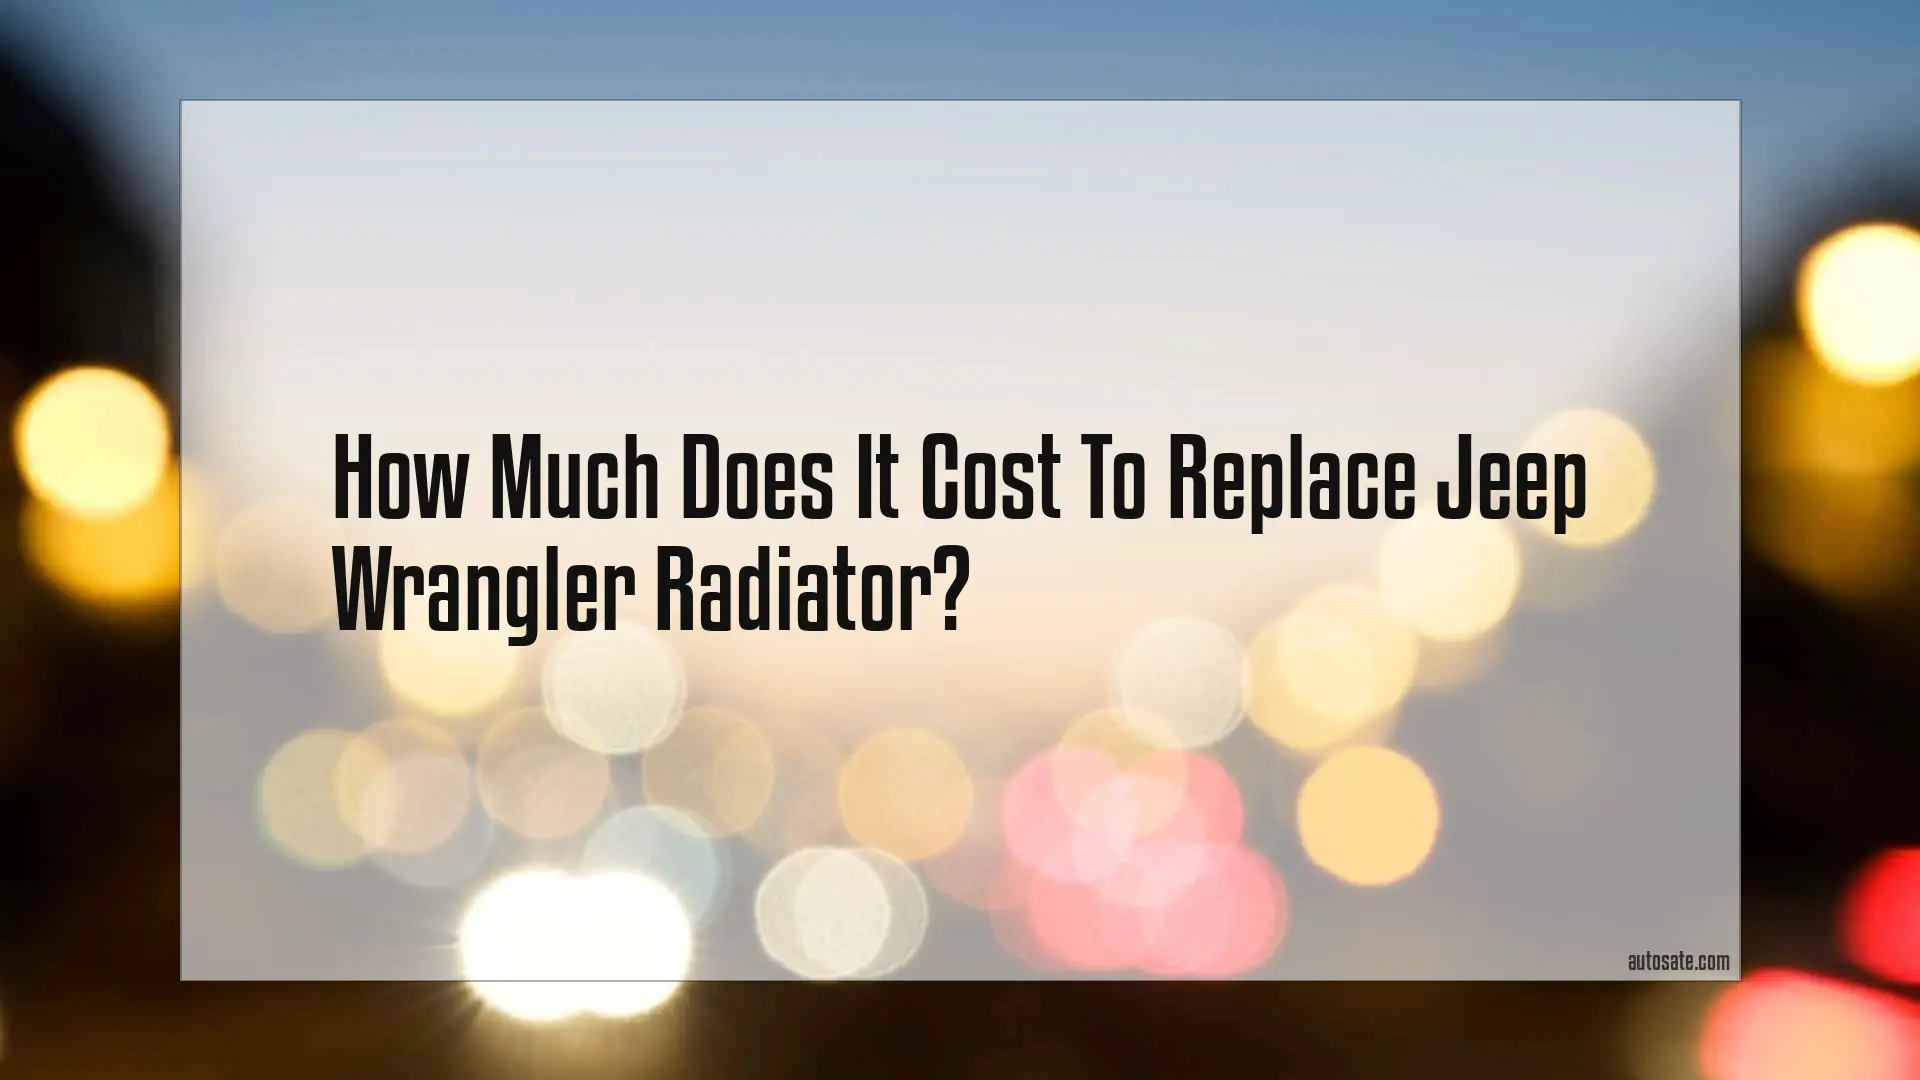 How Much Does It Cost To Replace Jeep Wrangler Radiator